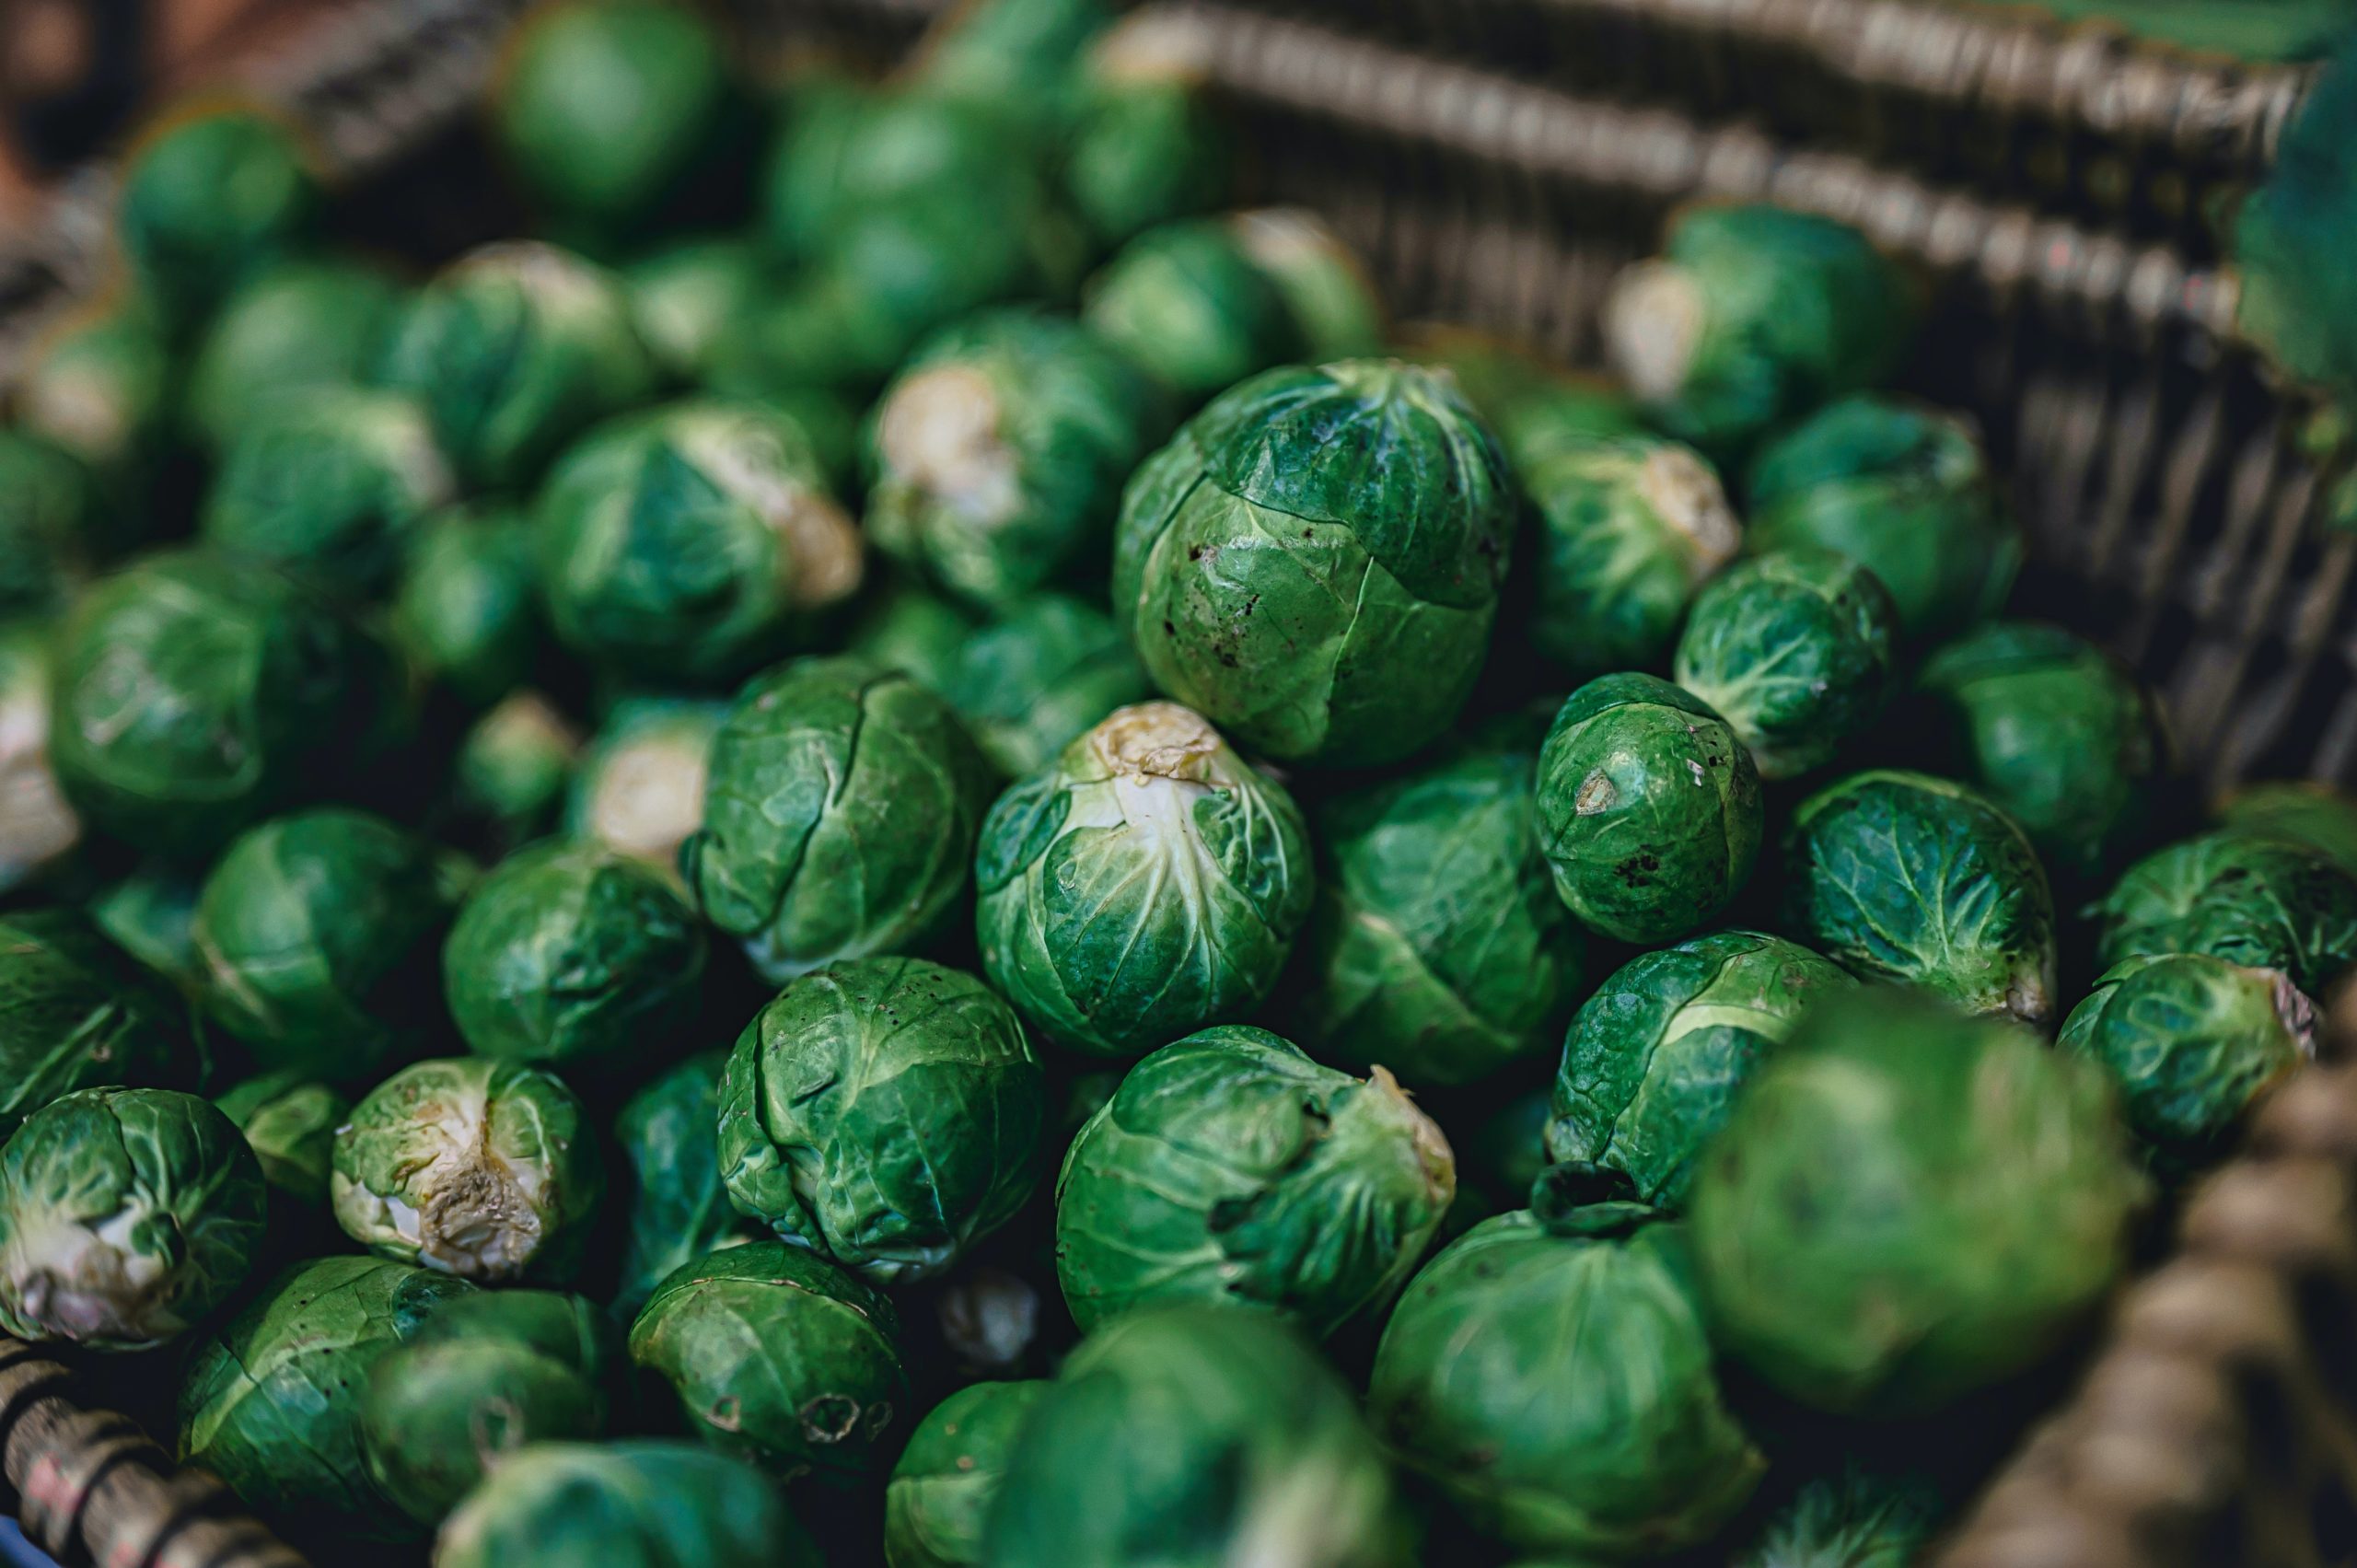 How To Grow Brussels Sprouts in the Fall